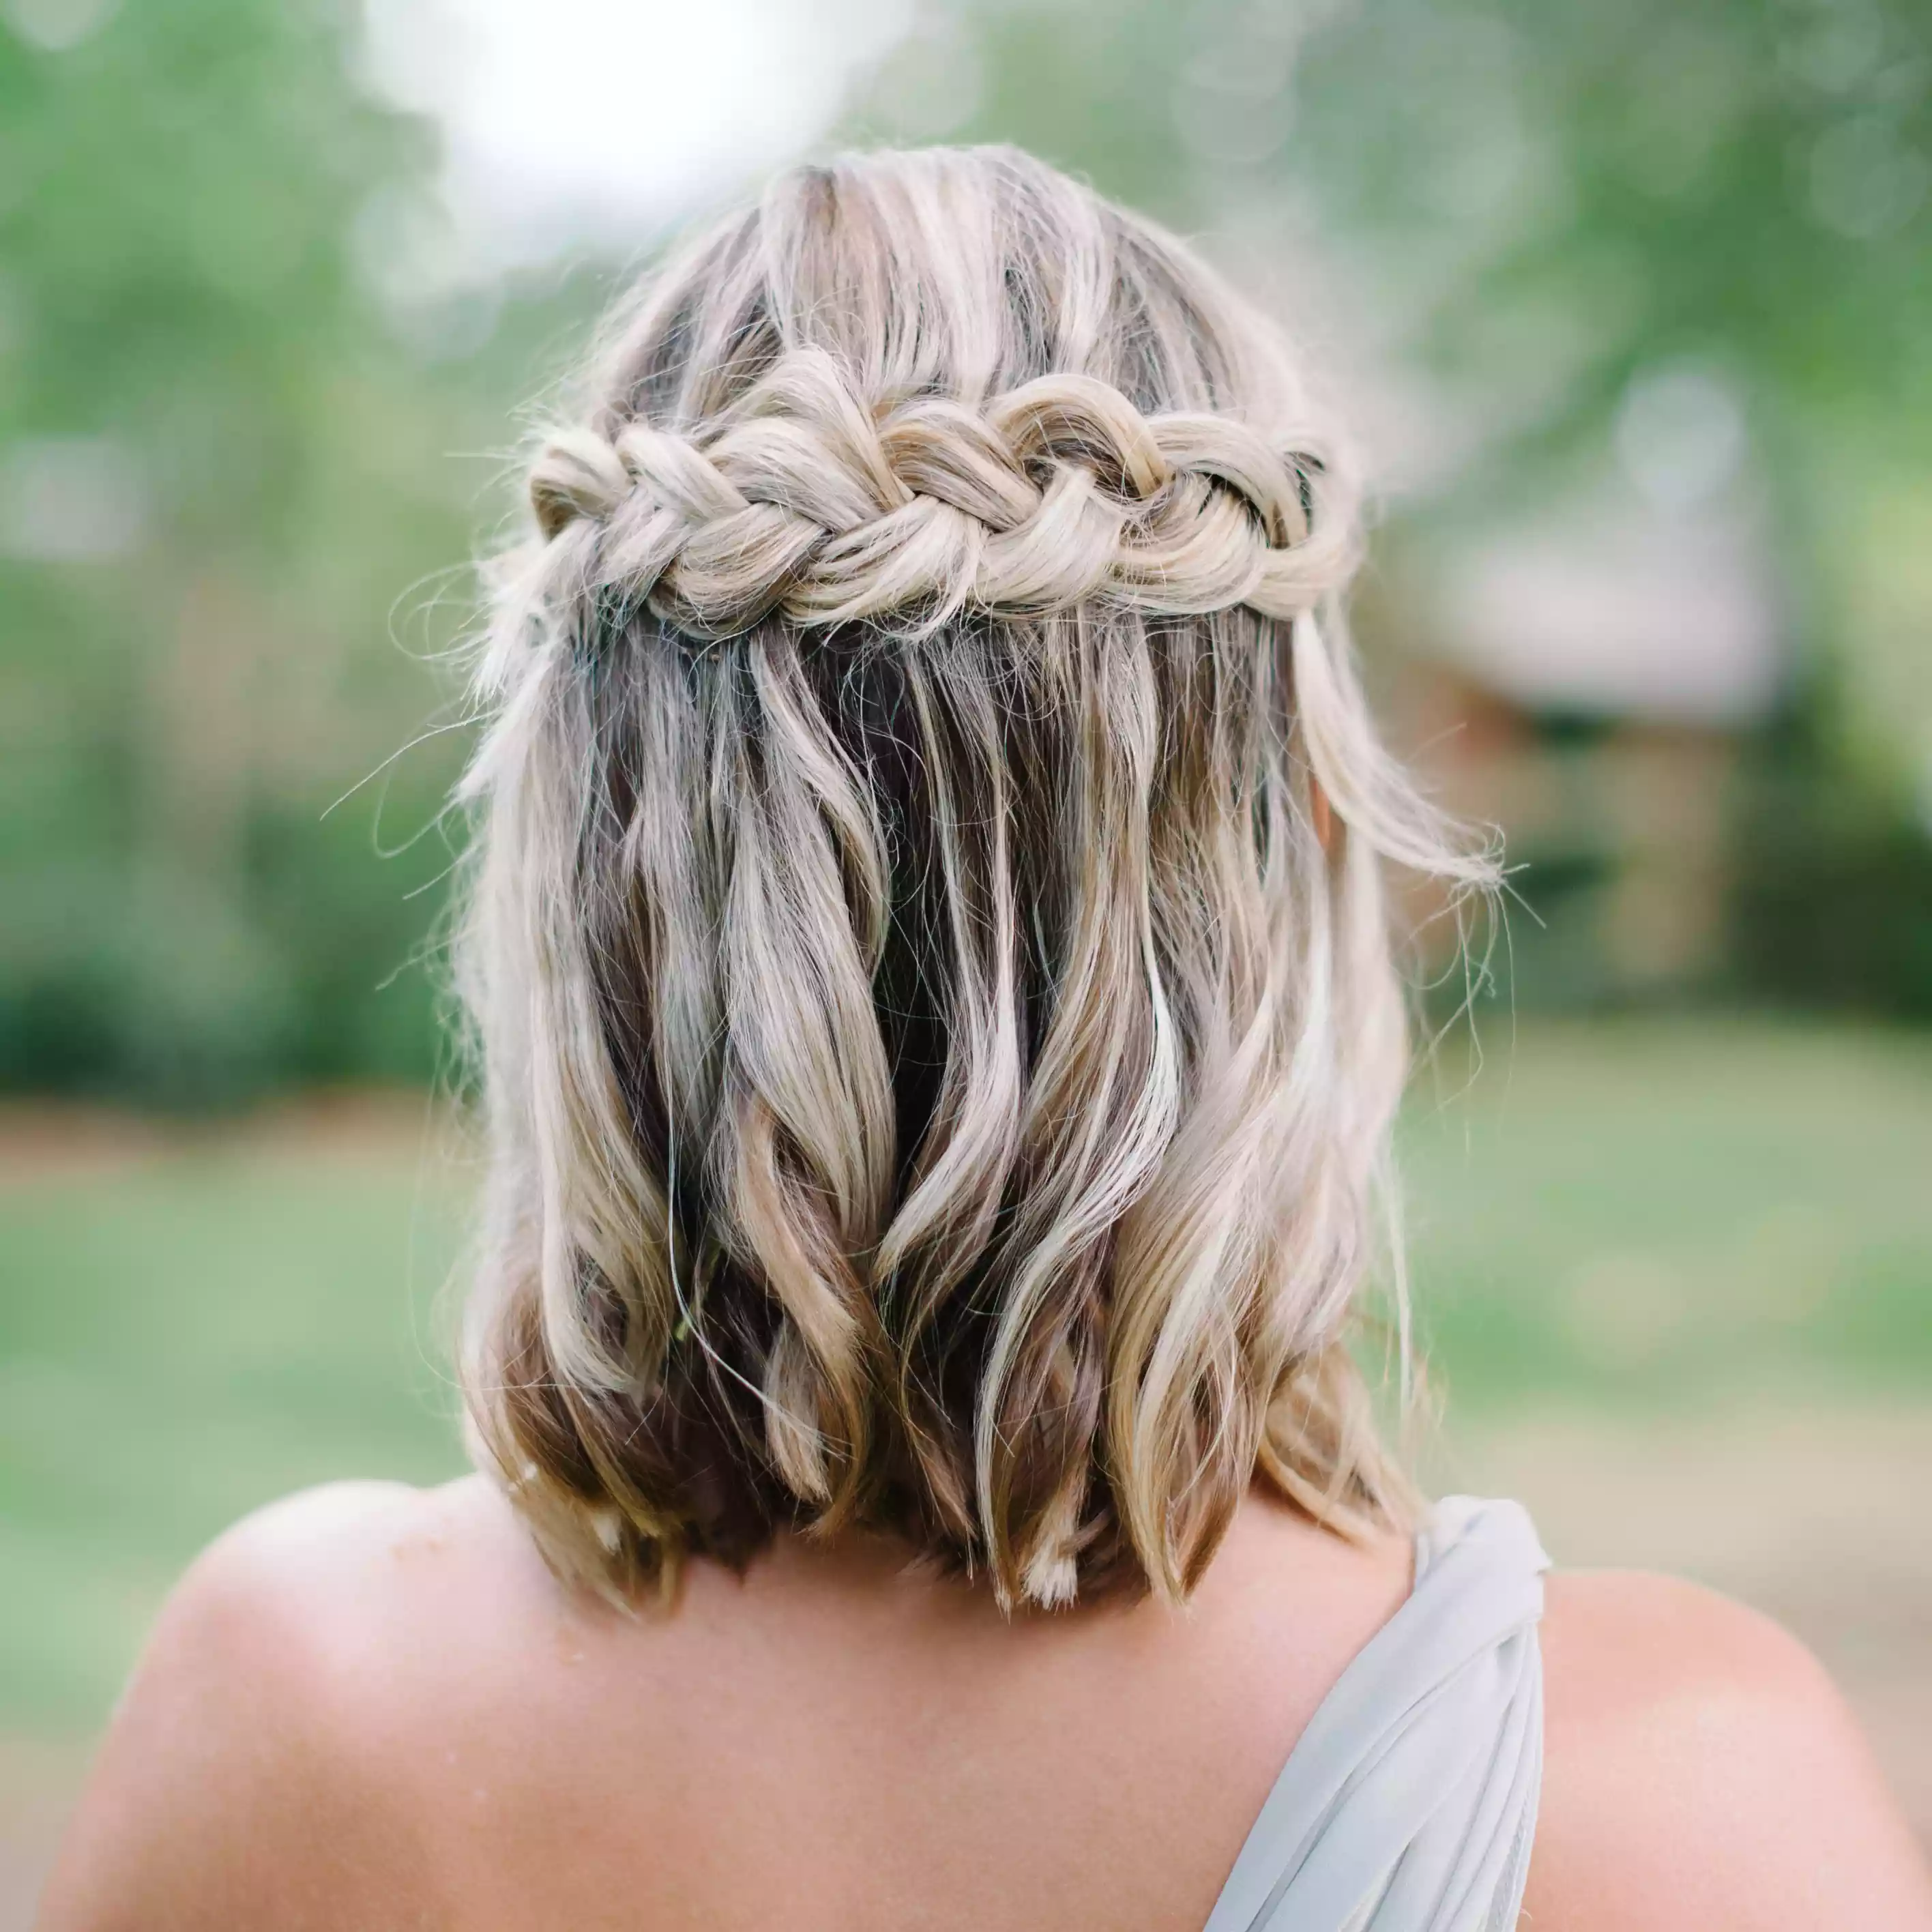 short bridal hairstyle with braid wrap across back of crown